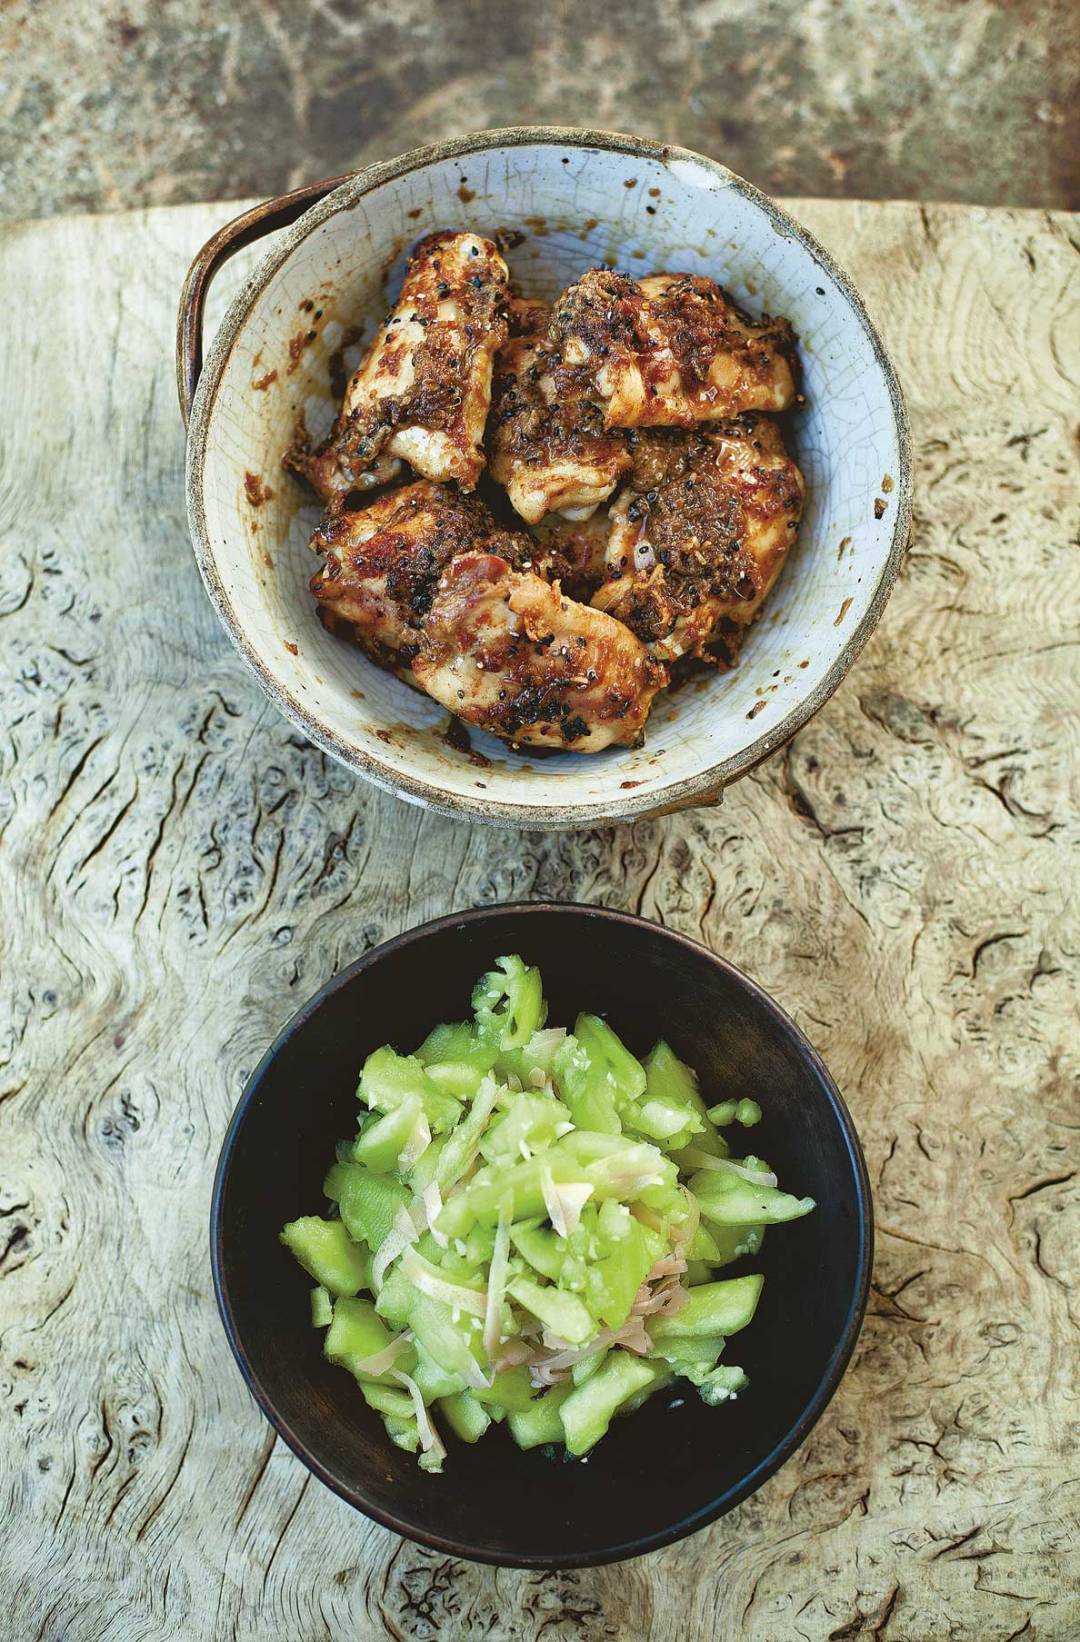 Japanese ginger and garlic chicken with smashed cucumber